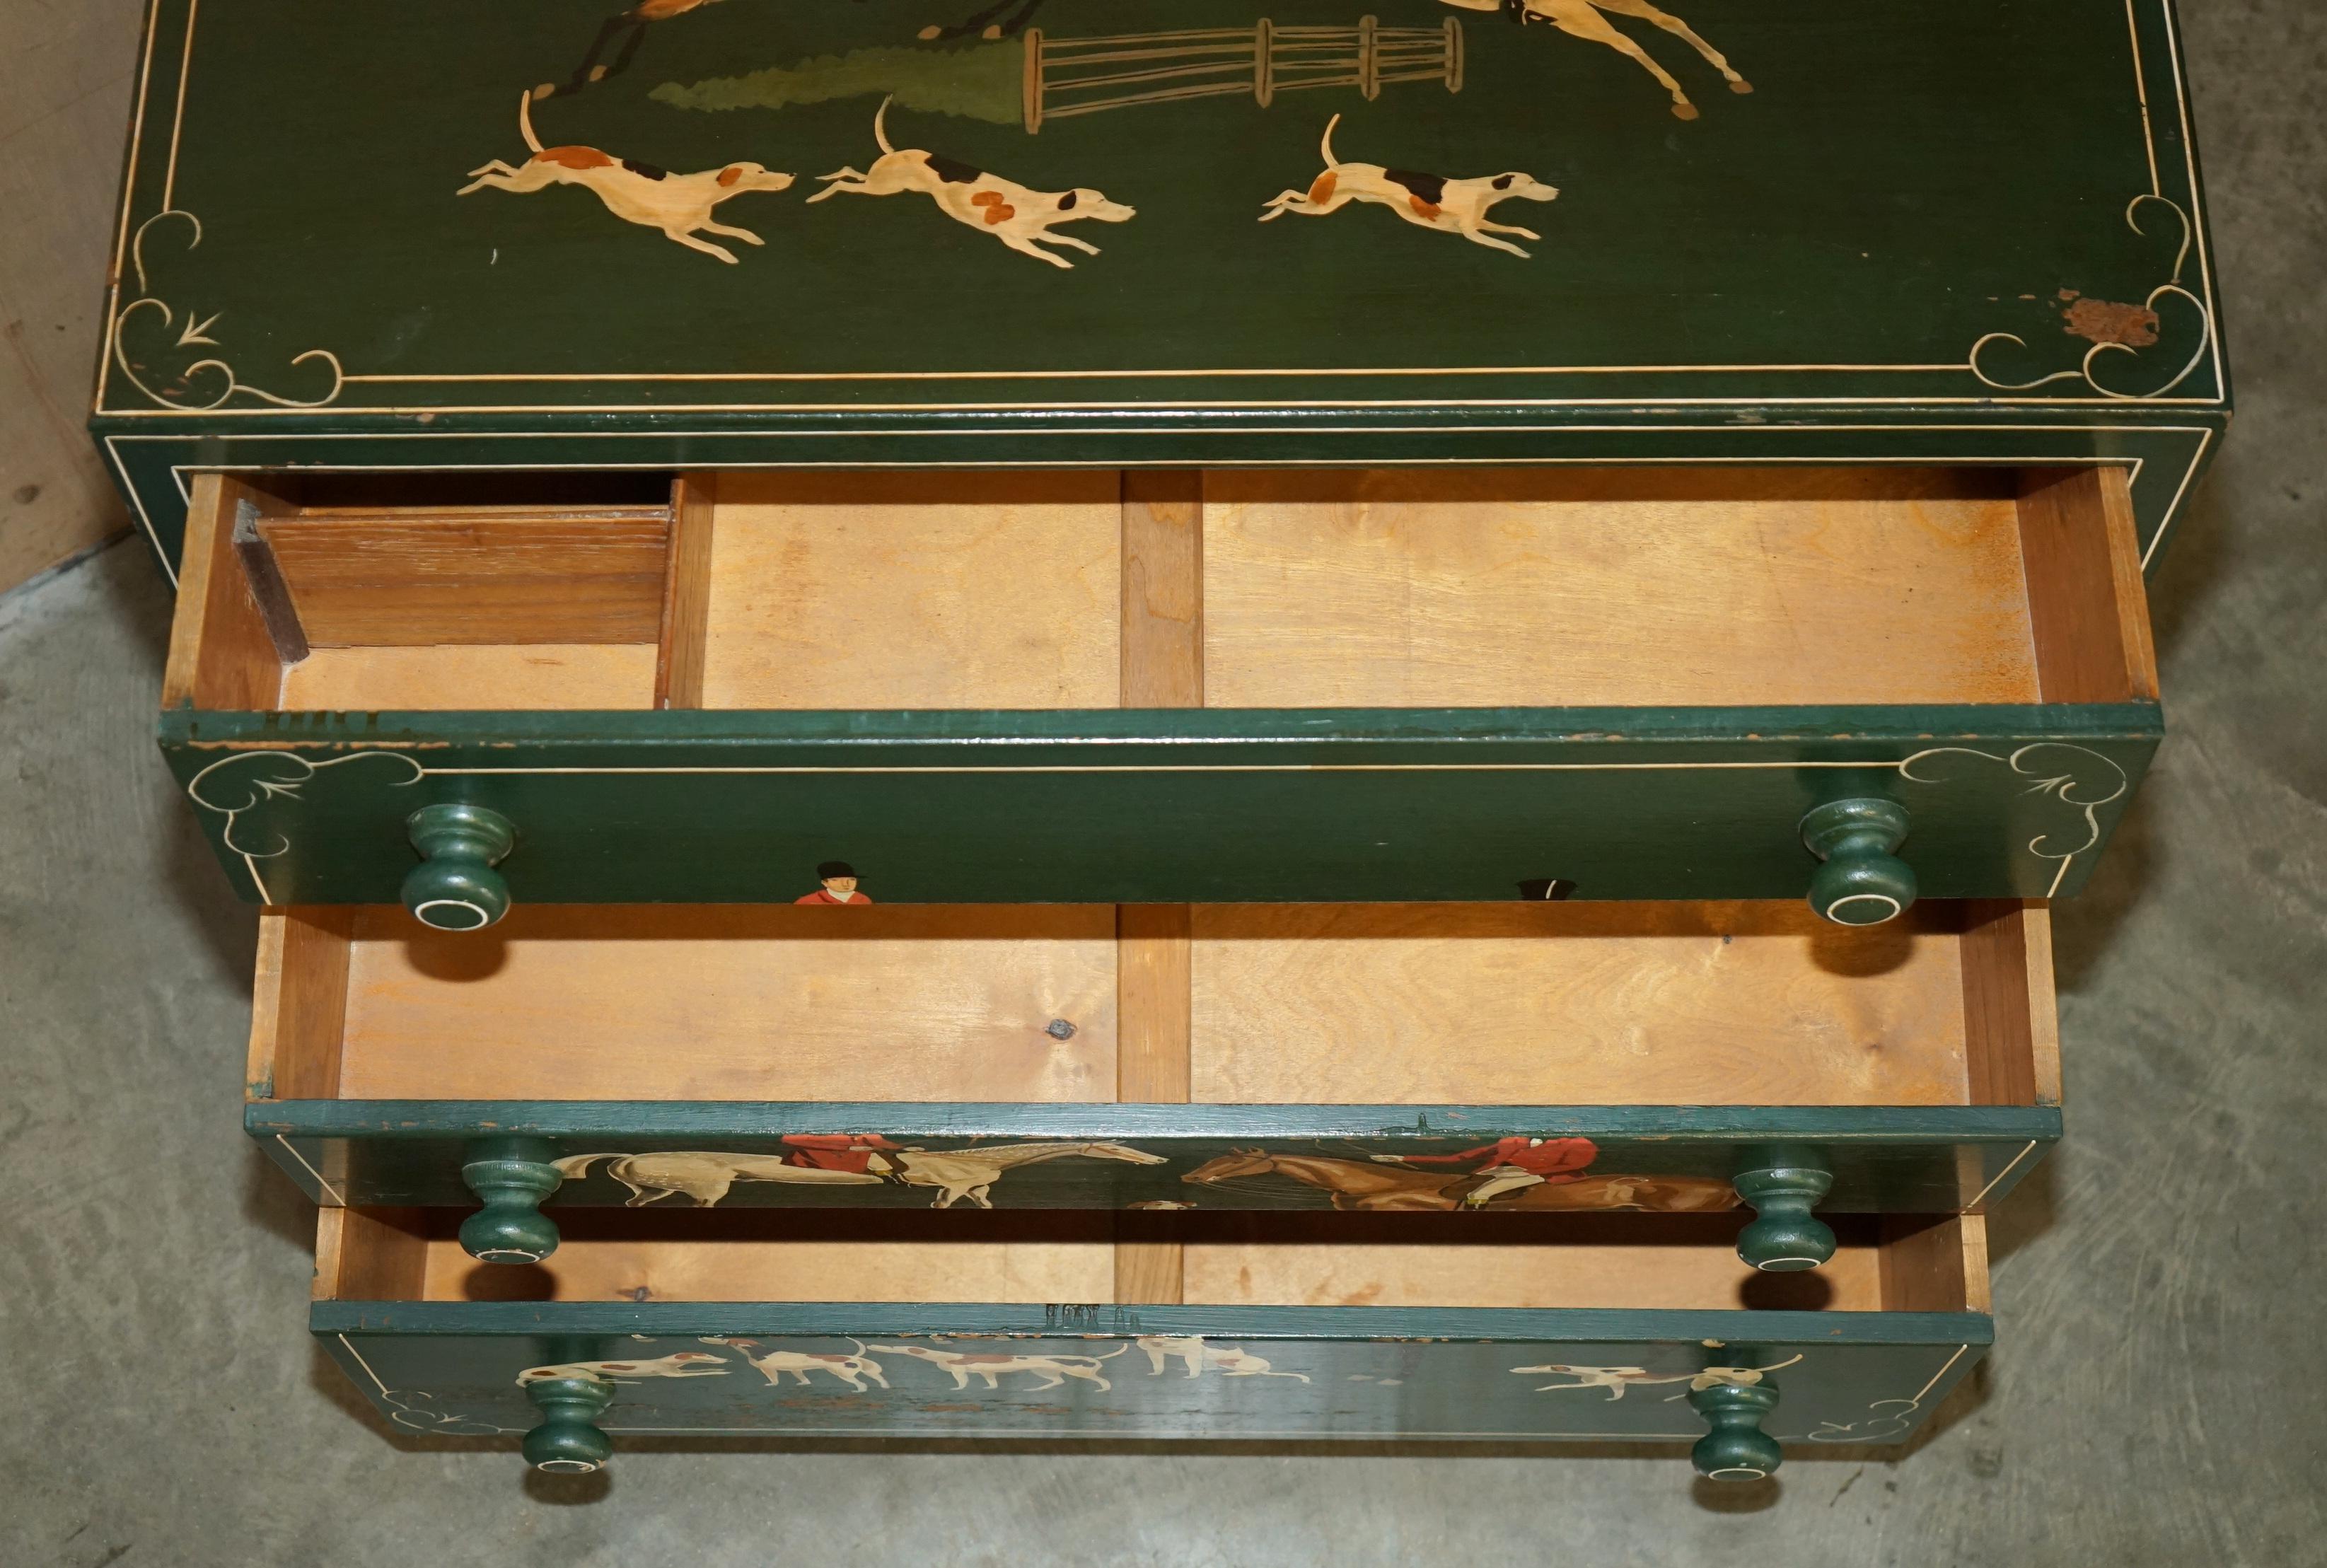 LOVELY ANTiQUE CHEST OF DRAWERS PAINTES EN GREEN DEPICTING HORSE & RIDER CIRCA 1900 en vente 12